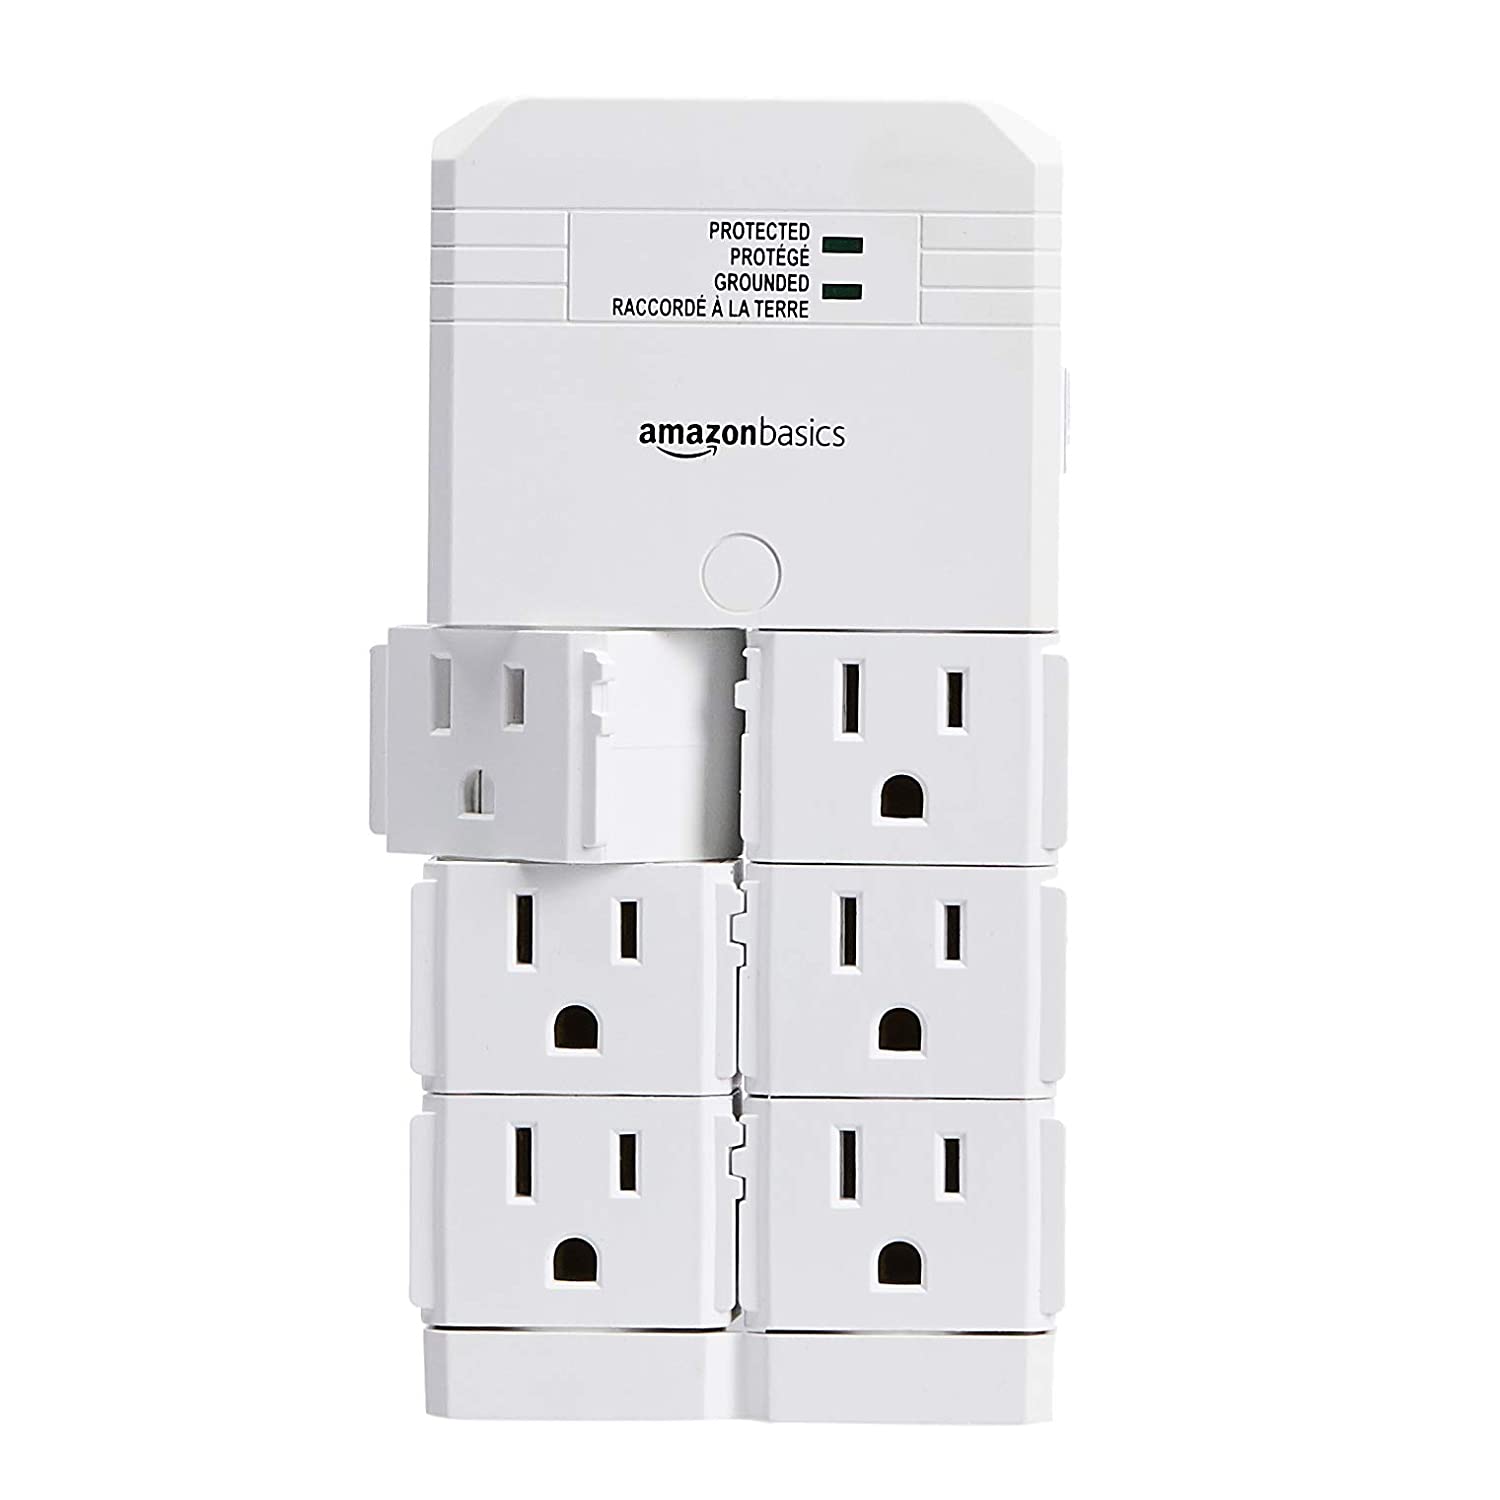 Amazon Basics Rotating 6-Outlet Surge Protector Wall Mount, 1080 Joules, White